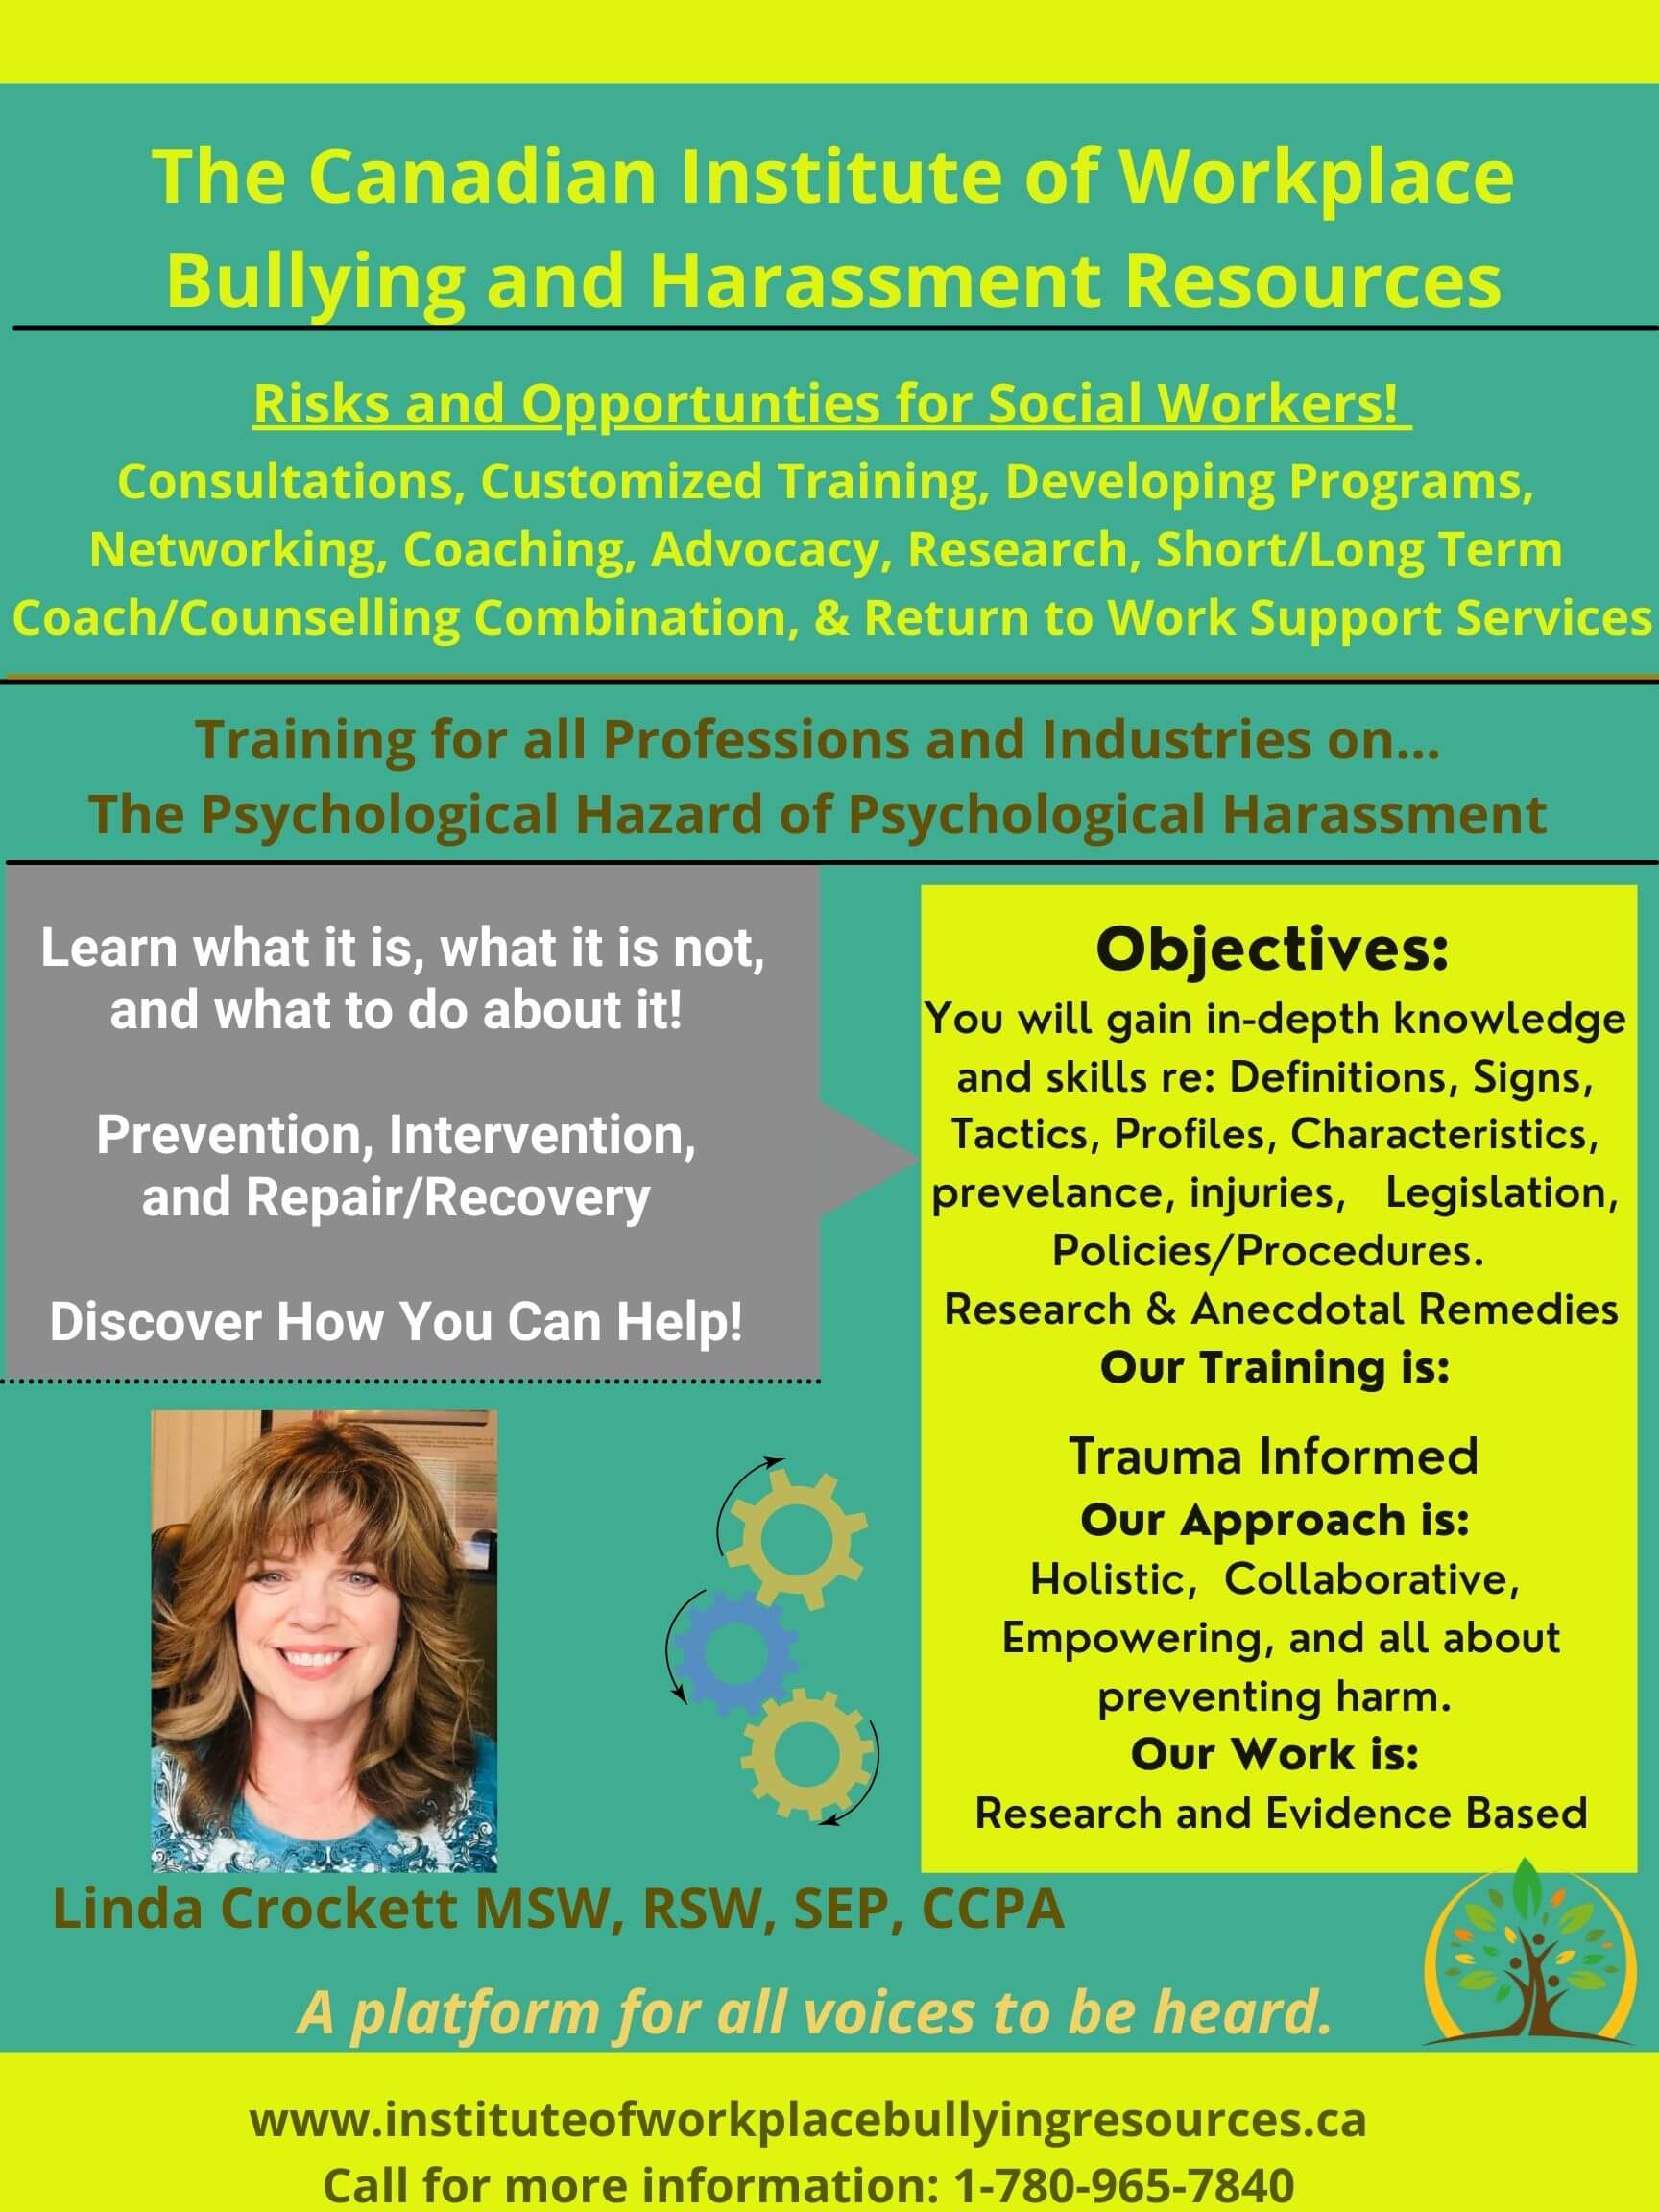 workshop for social workers, bullying and harassment resources